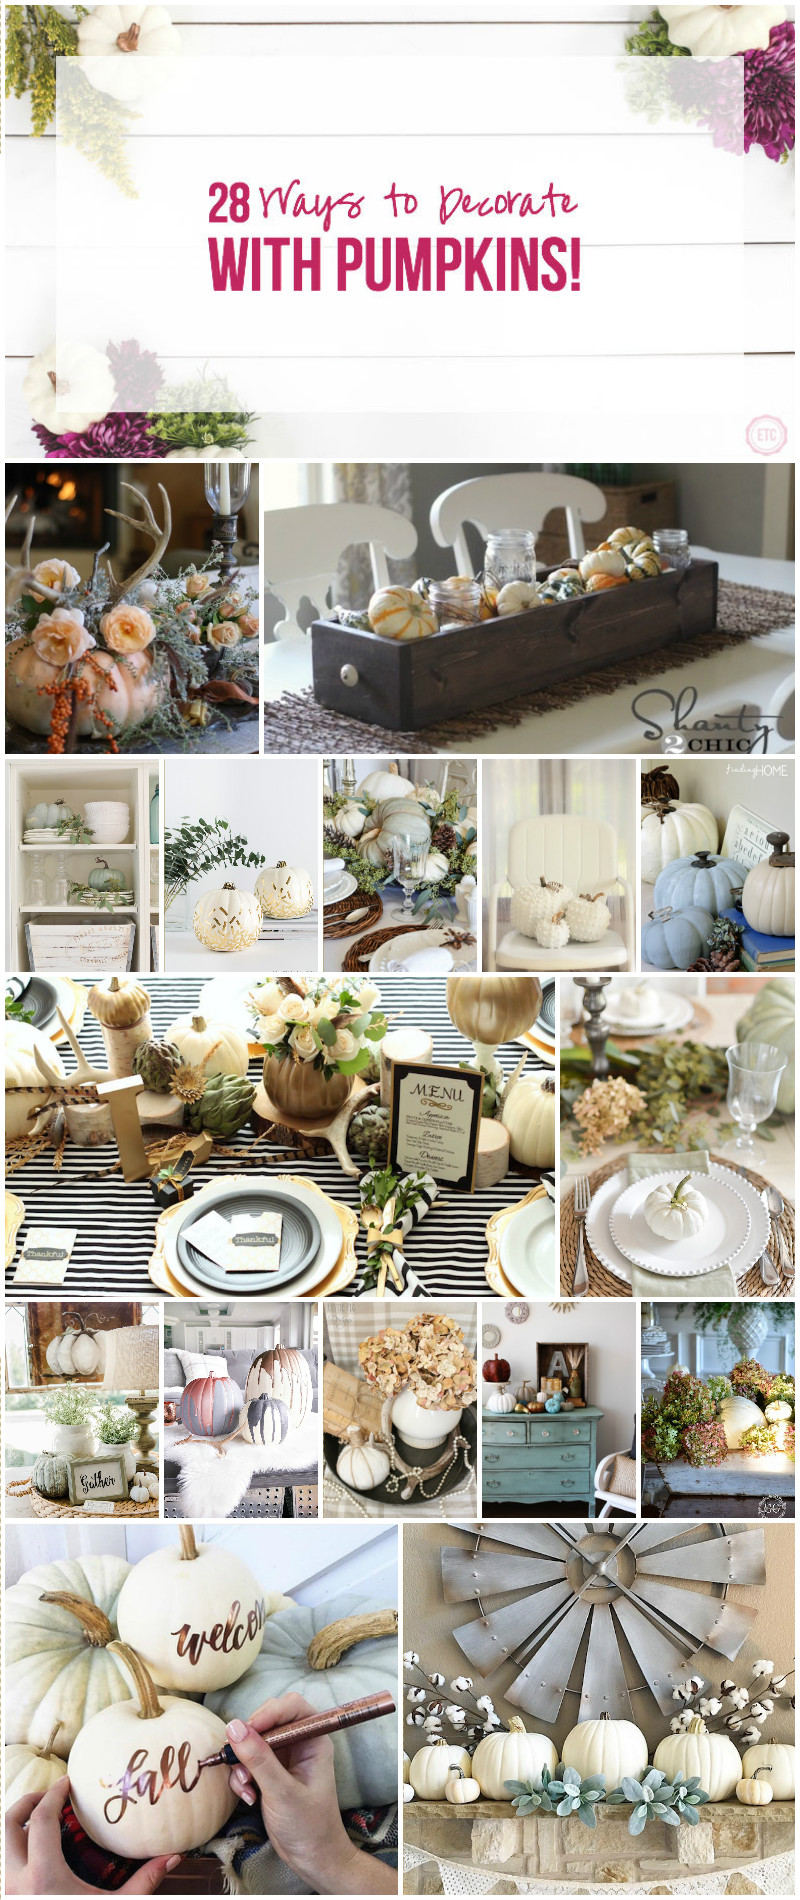 28 Ways to Decorate with PUMPKINS!